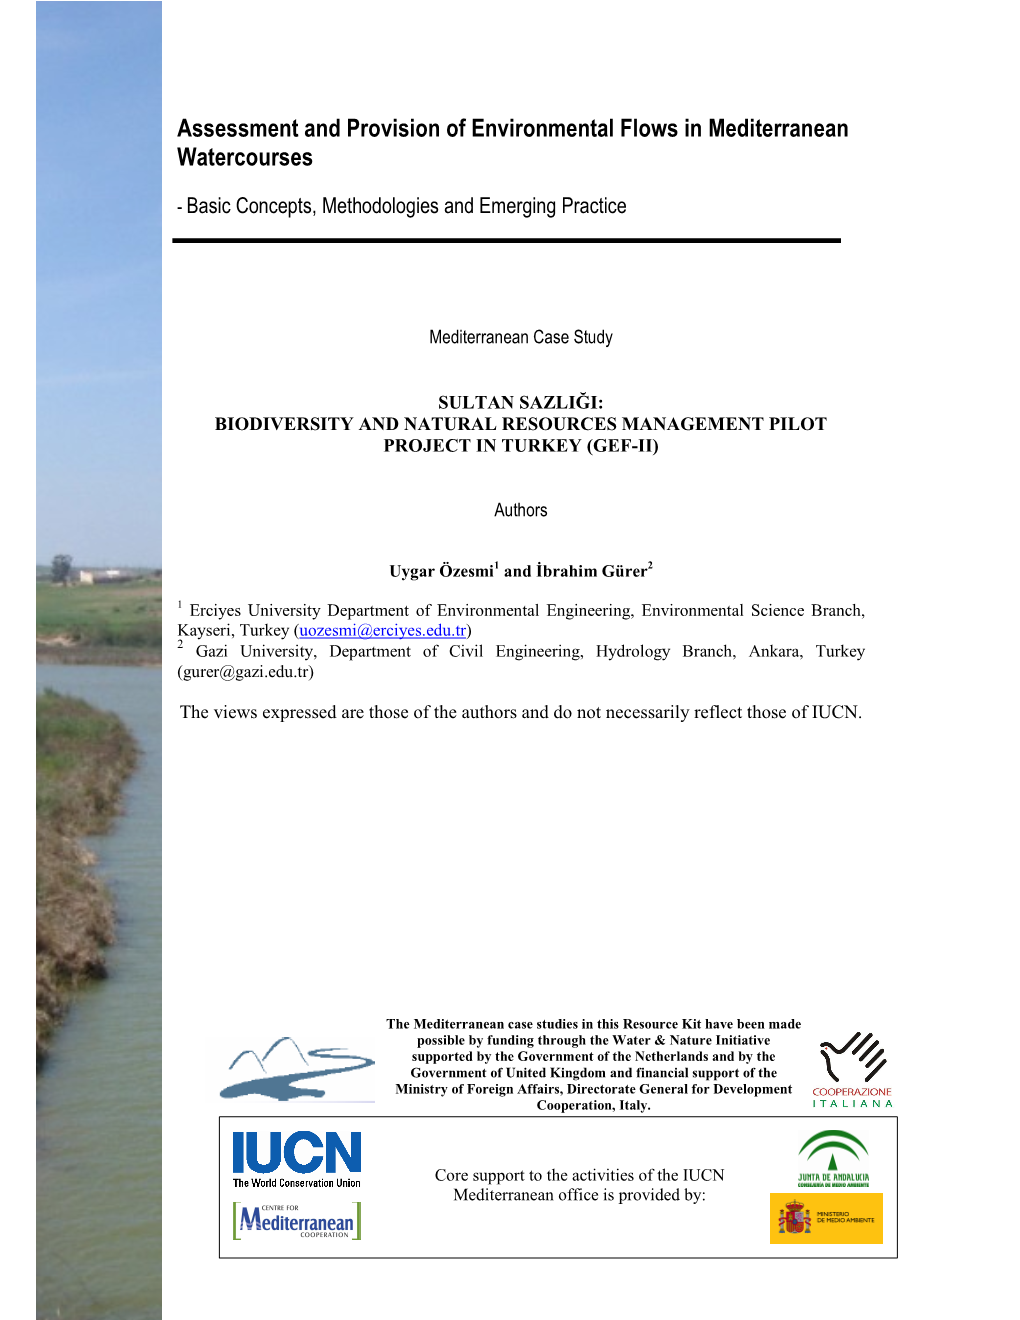 Assessment and Provision of Environmental Flows in Mediterranean Watercourses